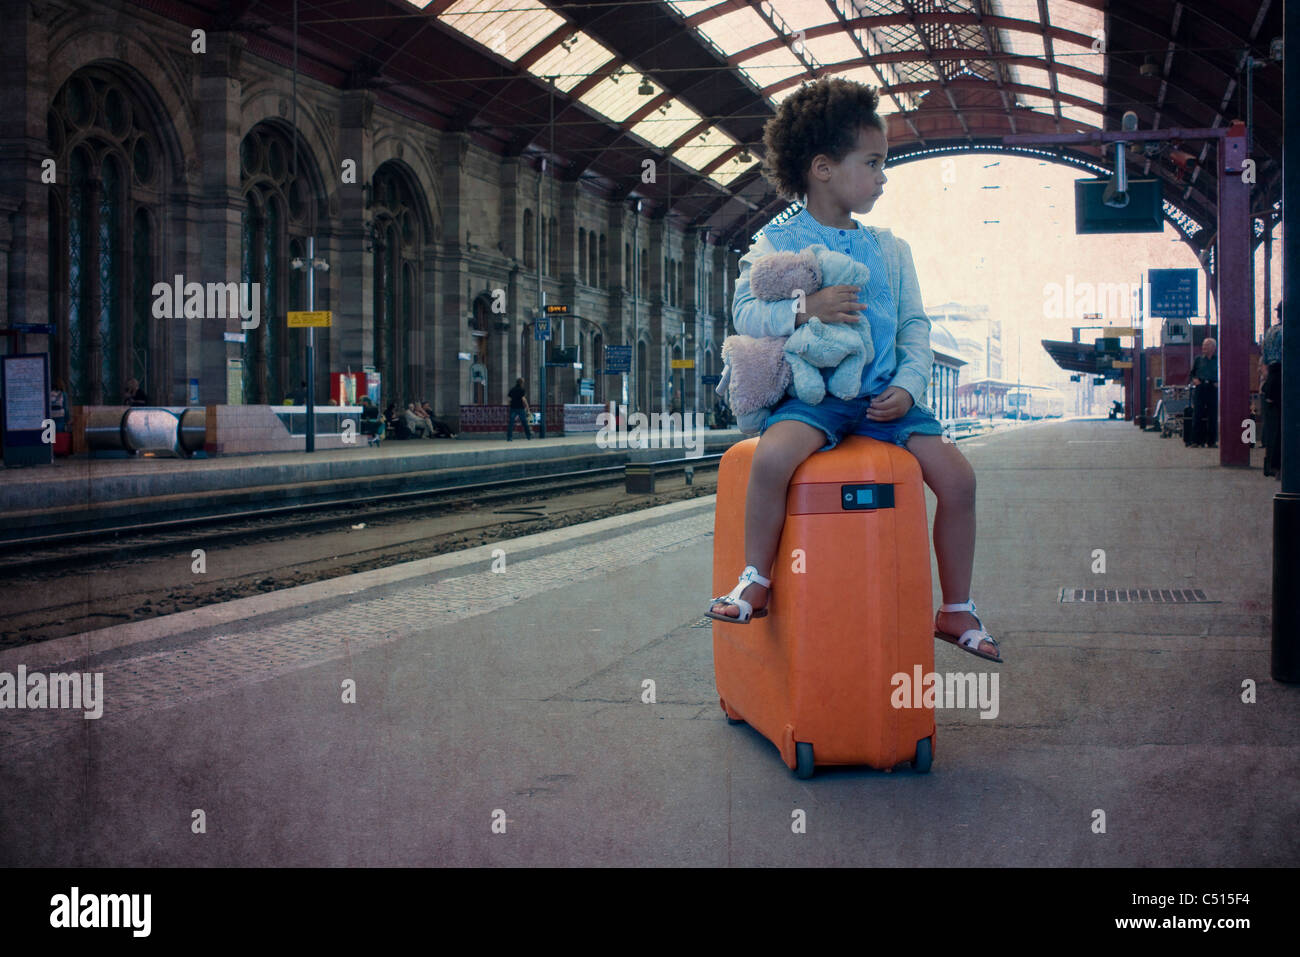 Little girl sitting on suitcase waiting in train station Stock Photo